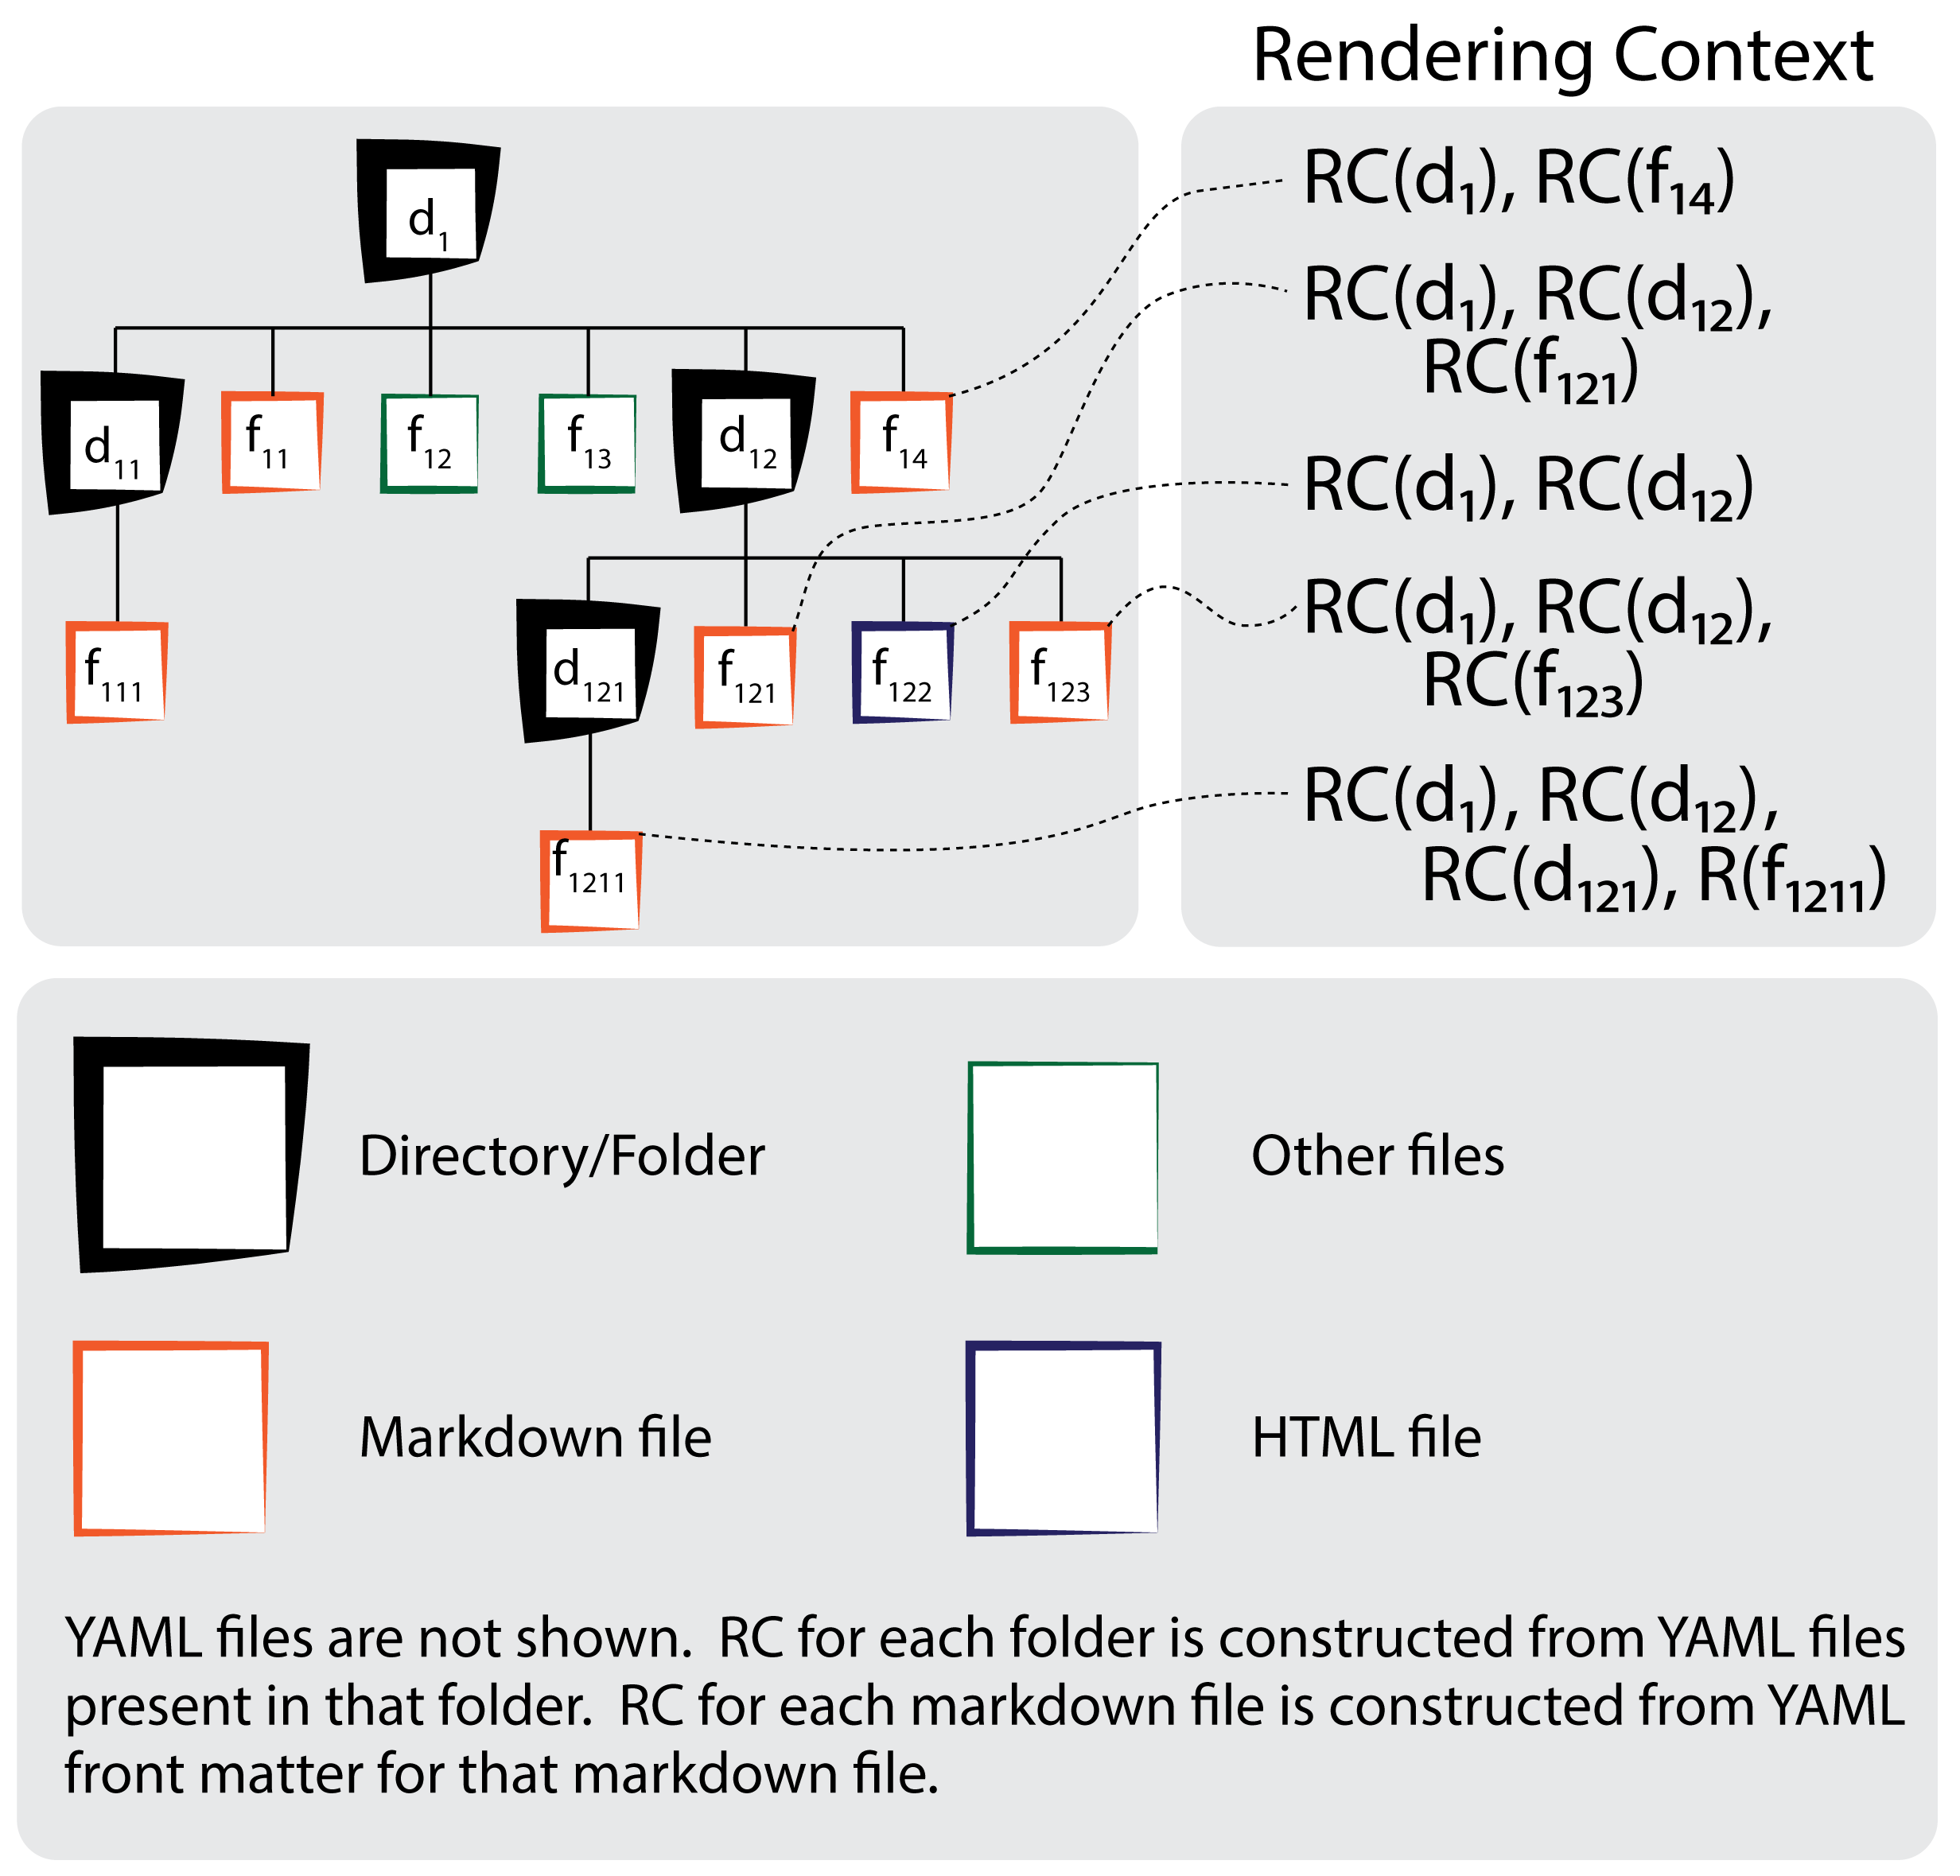 Figure 1: Rendering context construction for markdown and HTML files